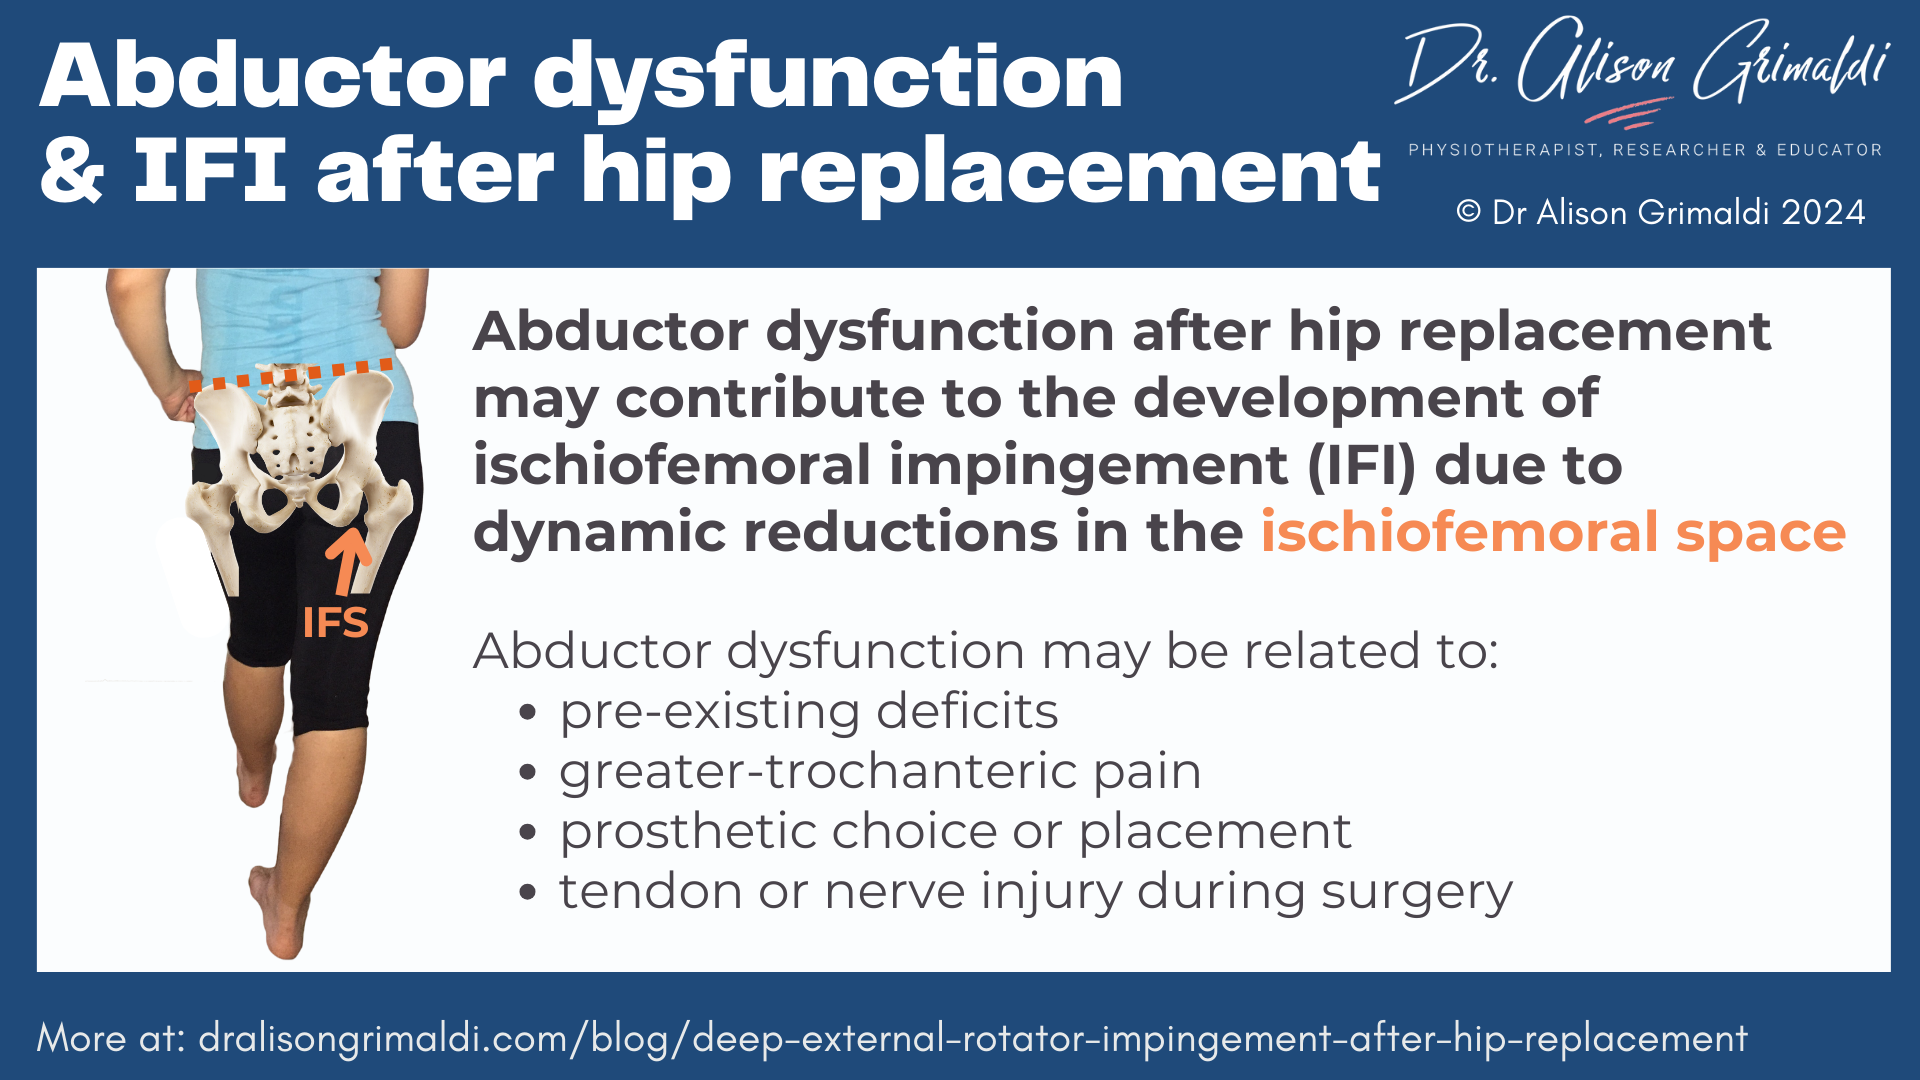 abductor-dysfunction-&-IFI-after-hip-replacement